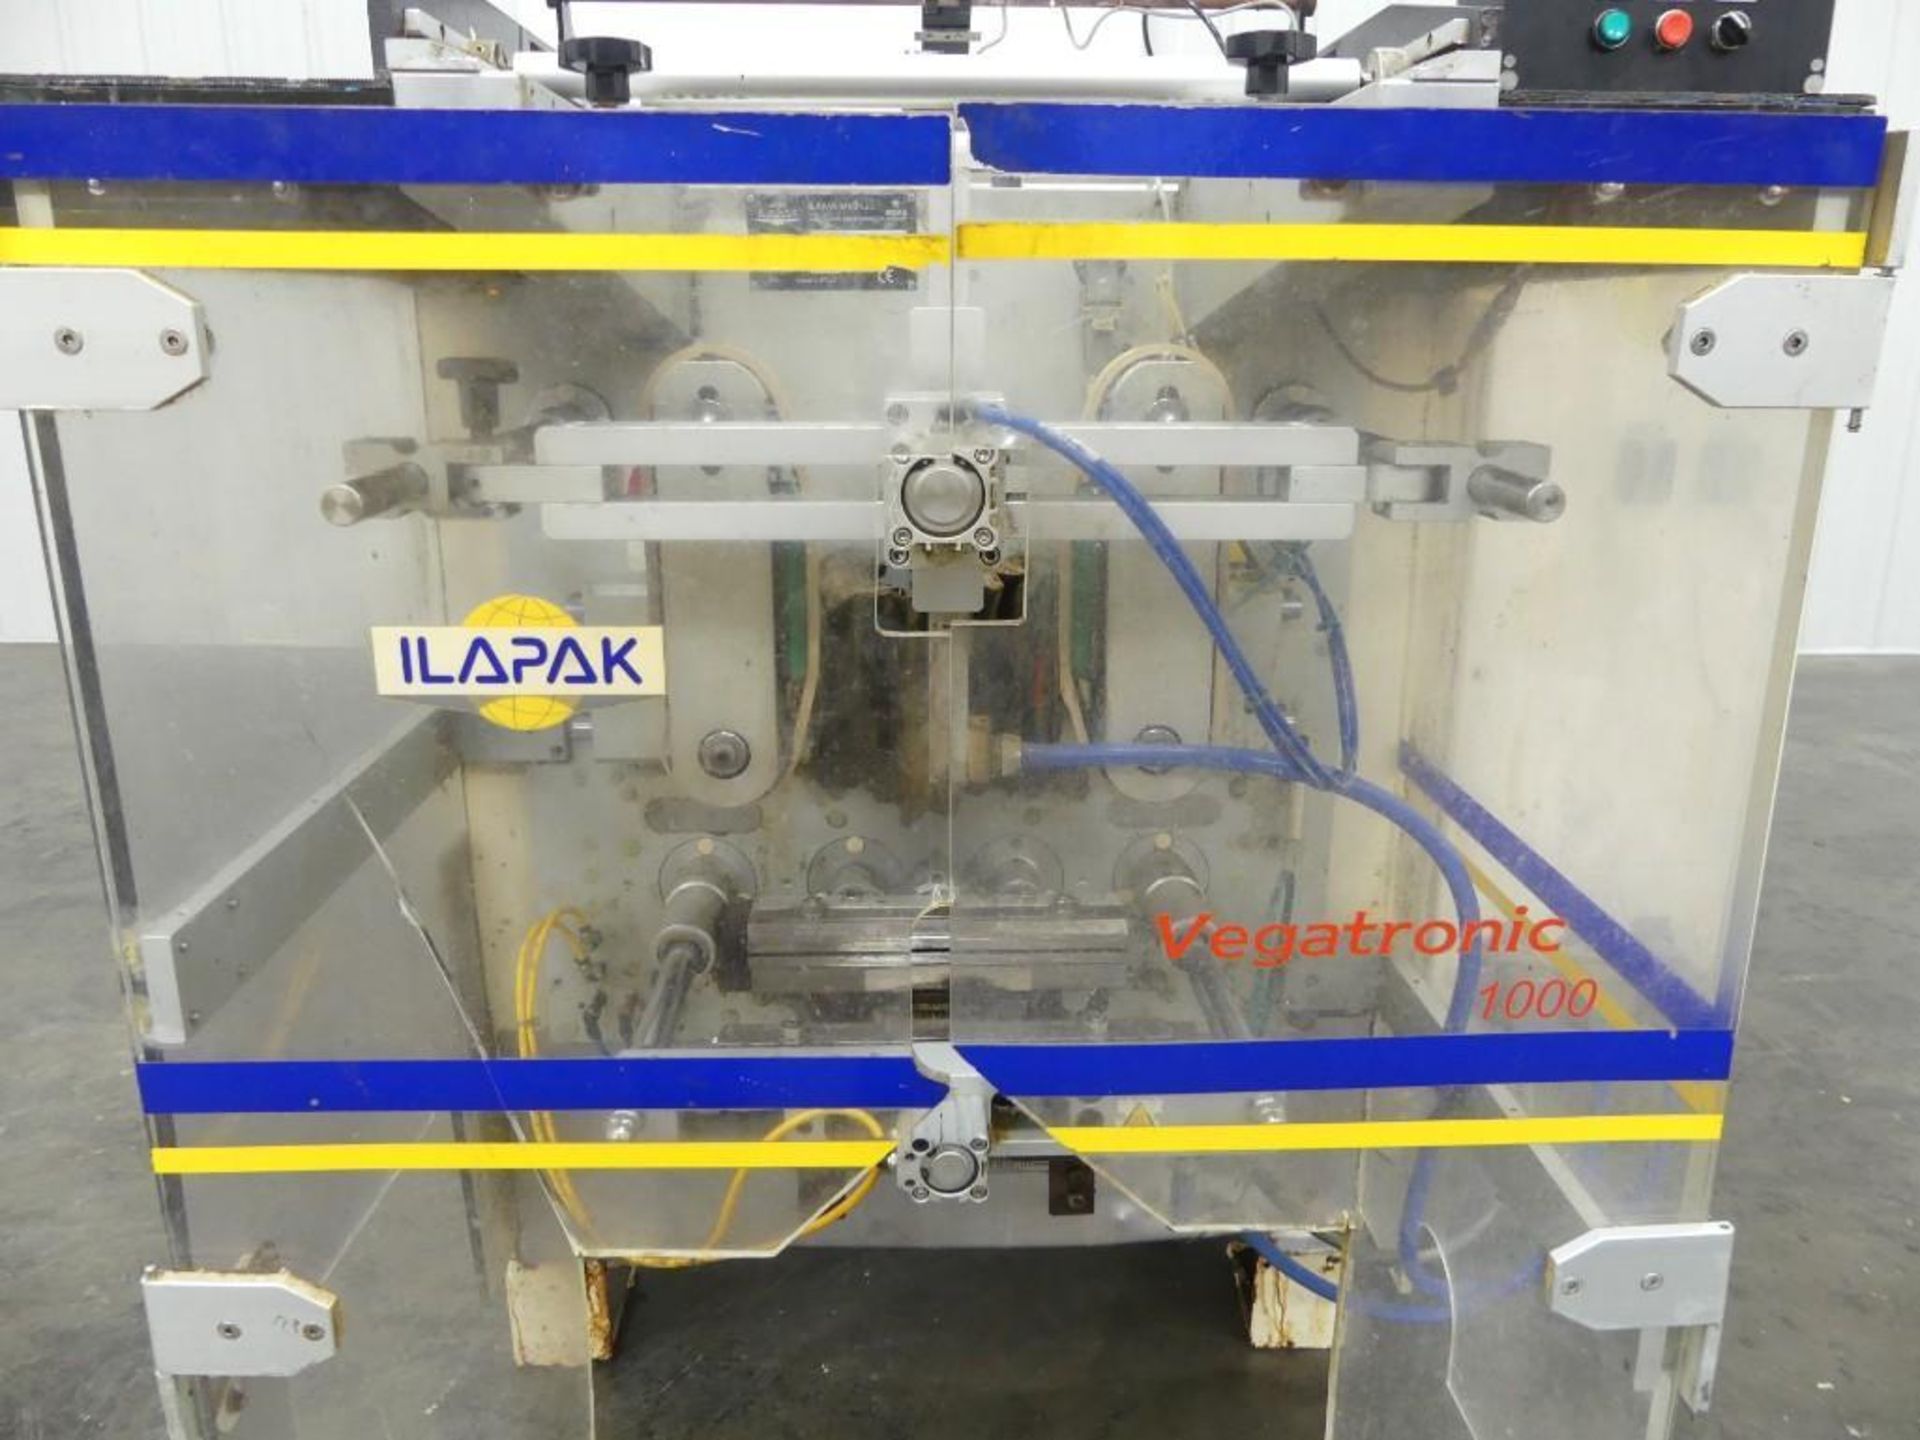 Ilapak Vegatronic 1000 Vertical Form Fill Seal - Image 5 of 14